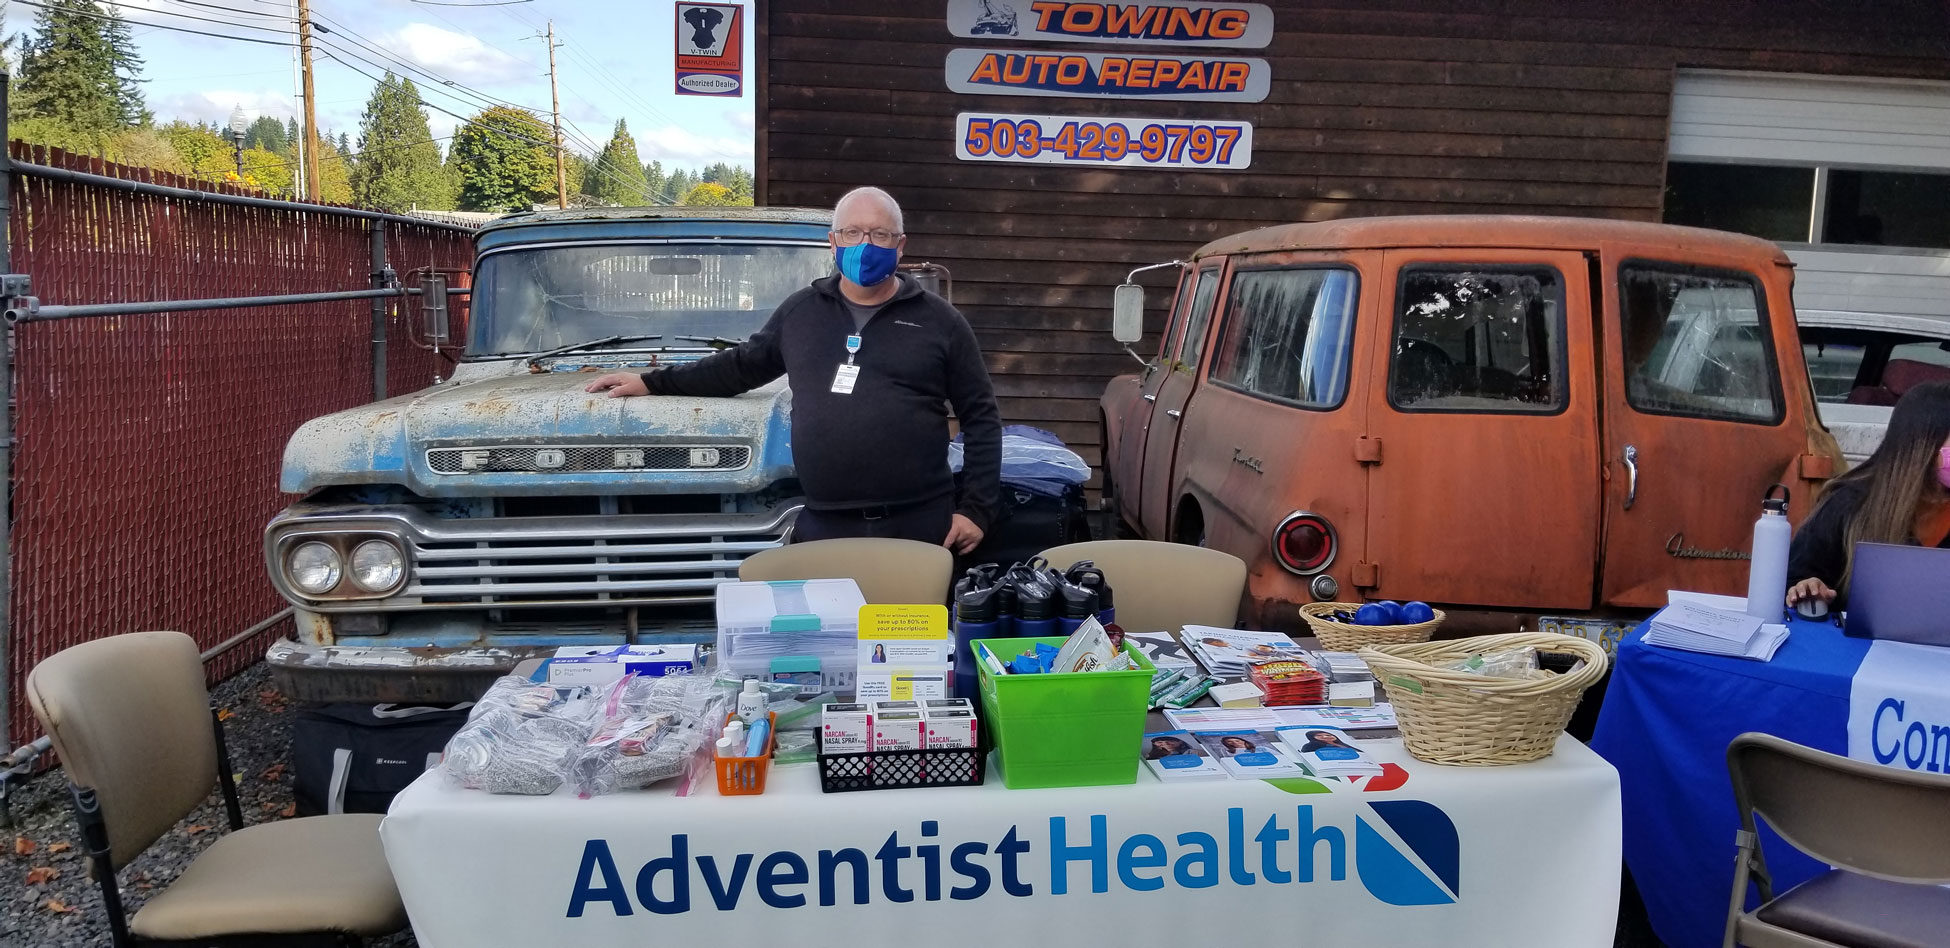 A nurse stands at a table at a community event with an auto shop in the background